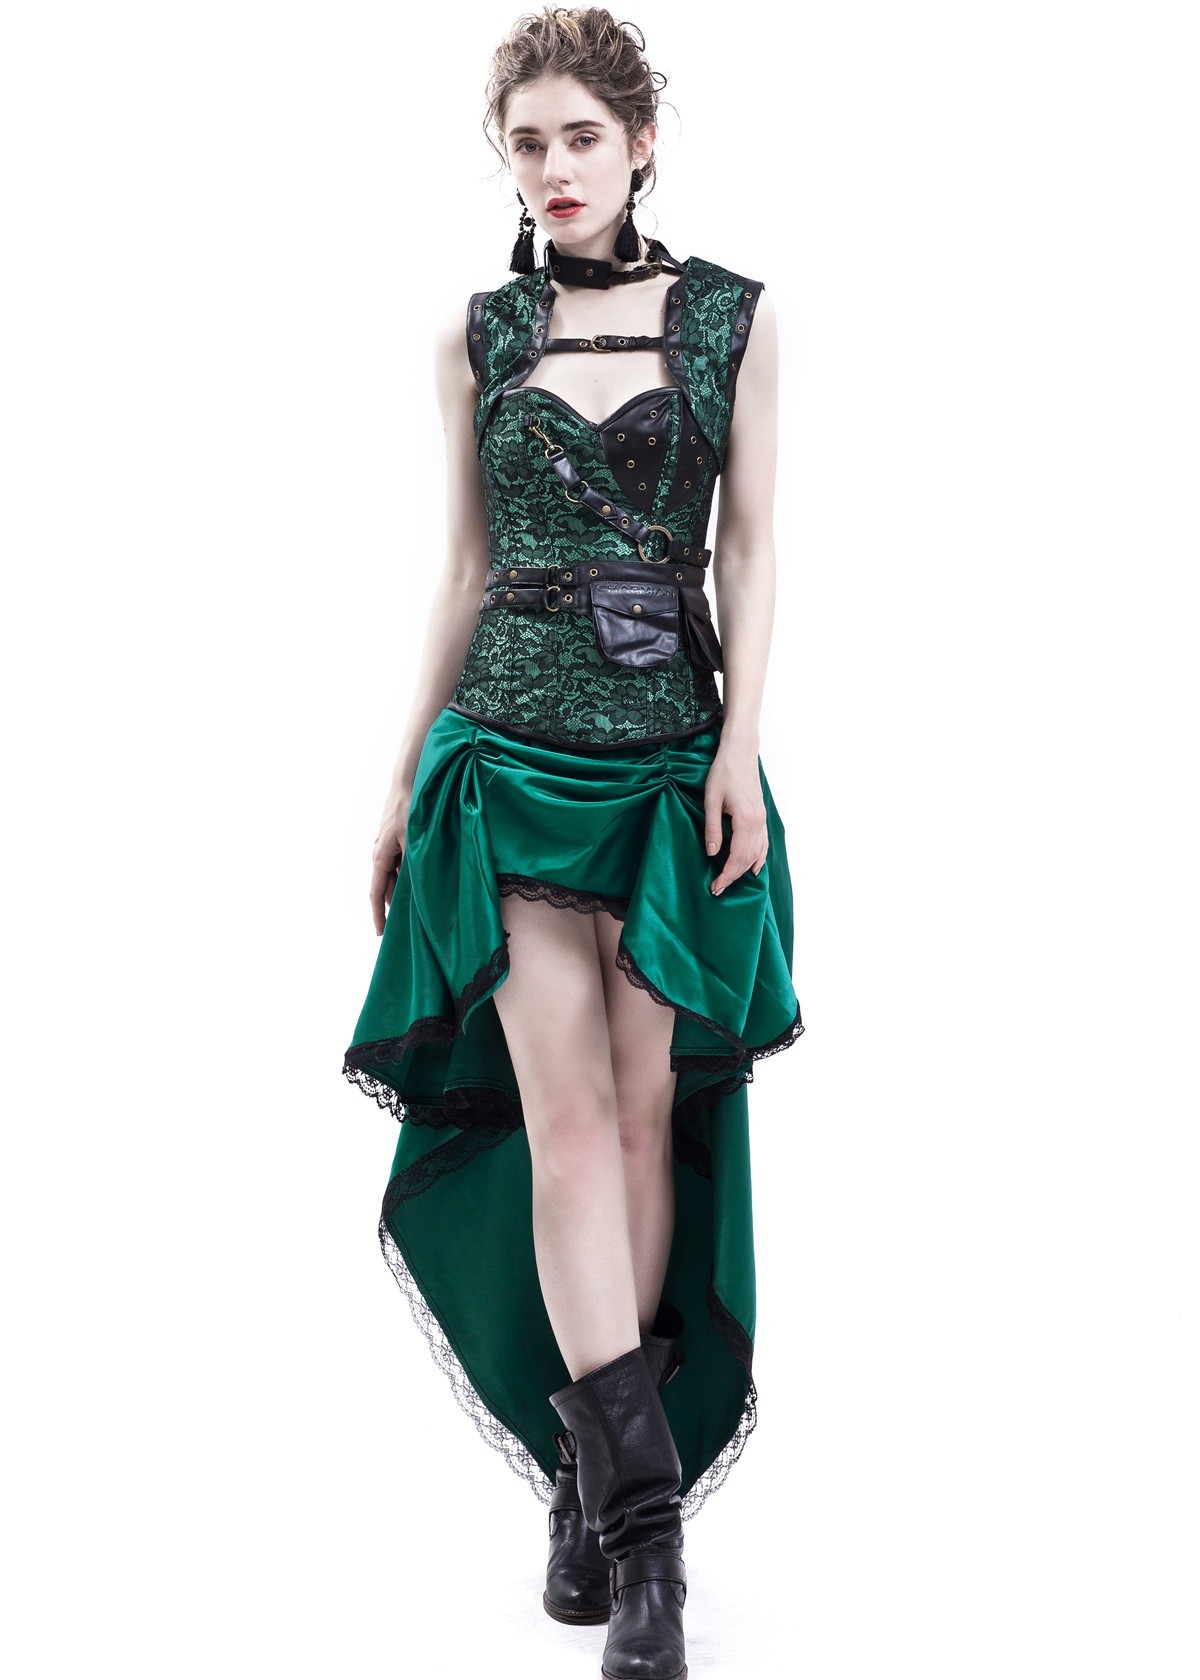 Green Gothic Steampunk Corset Party Dress D1044 - D-RoseBlooming